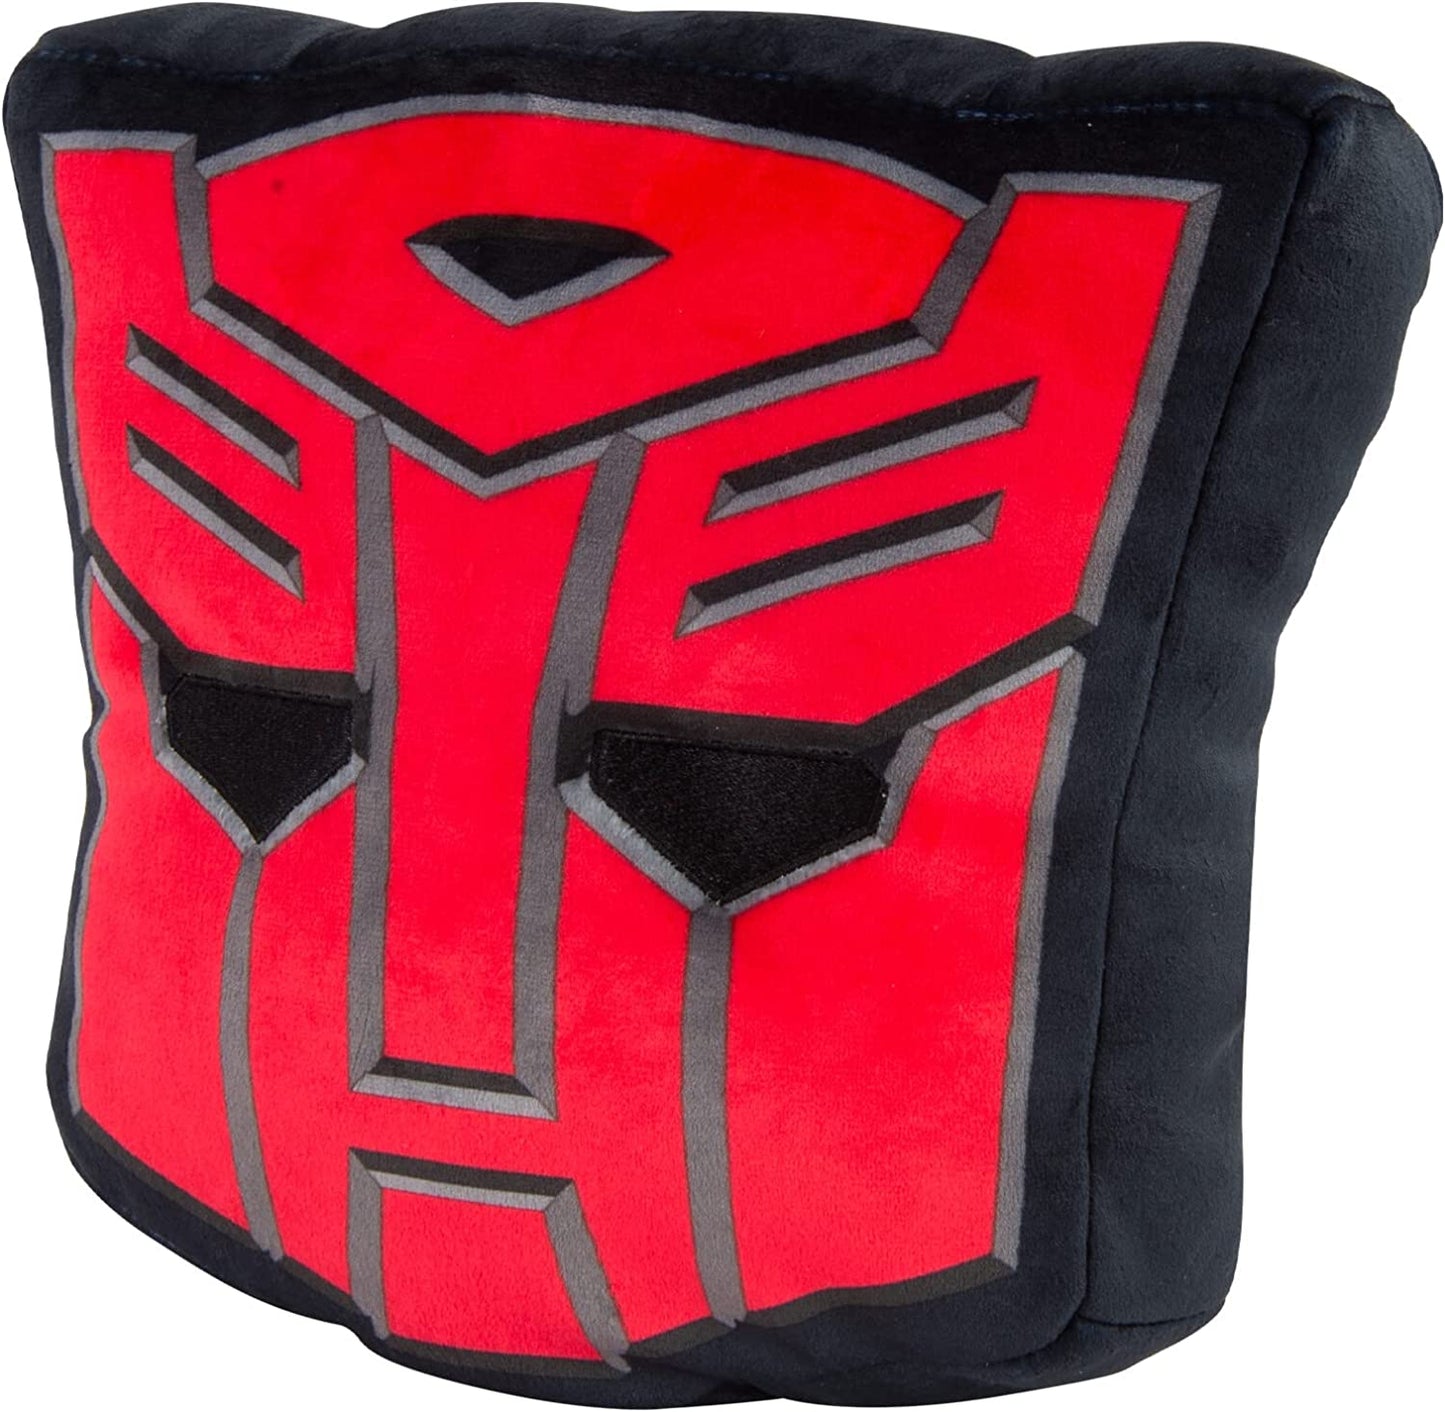 Club Mocchi Mocchi -Transformers Autobot Plushie, Collectible Squishy Plushies - 9 Inch